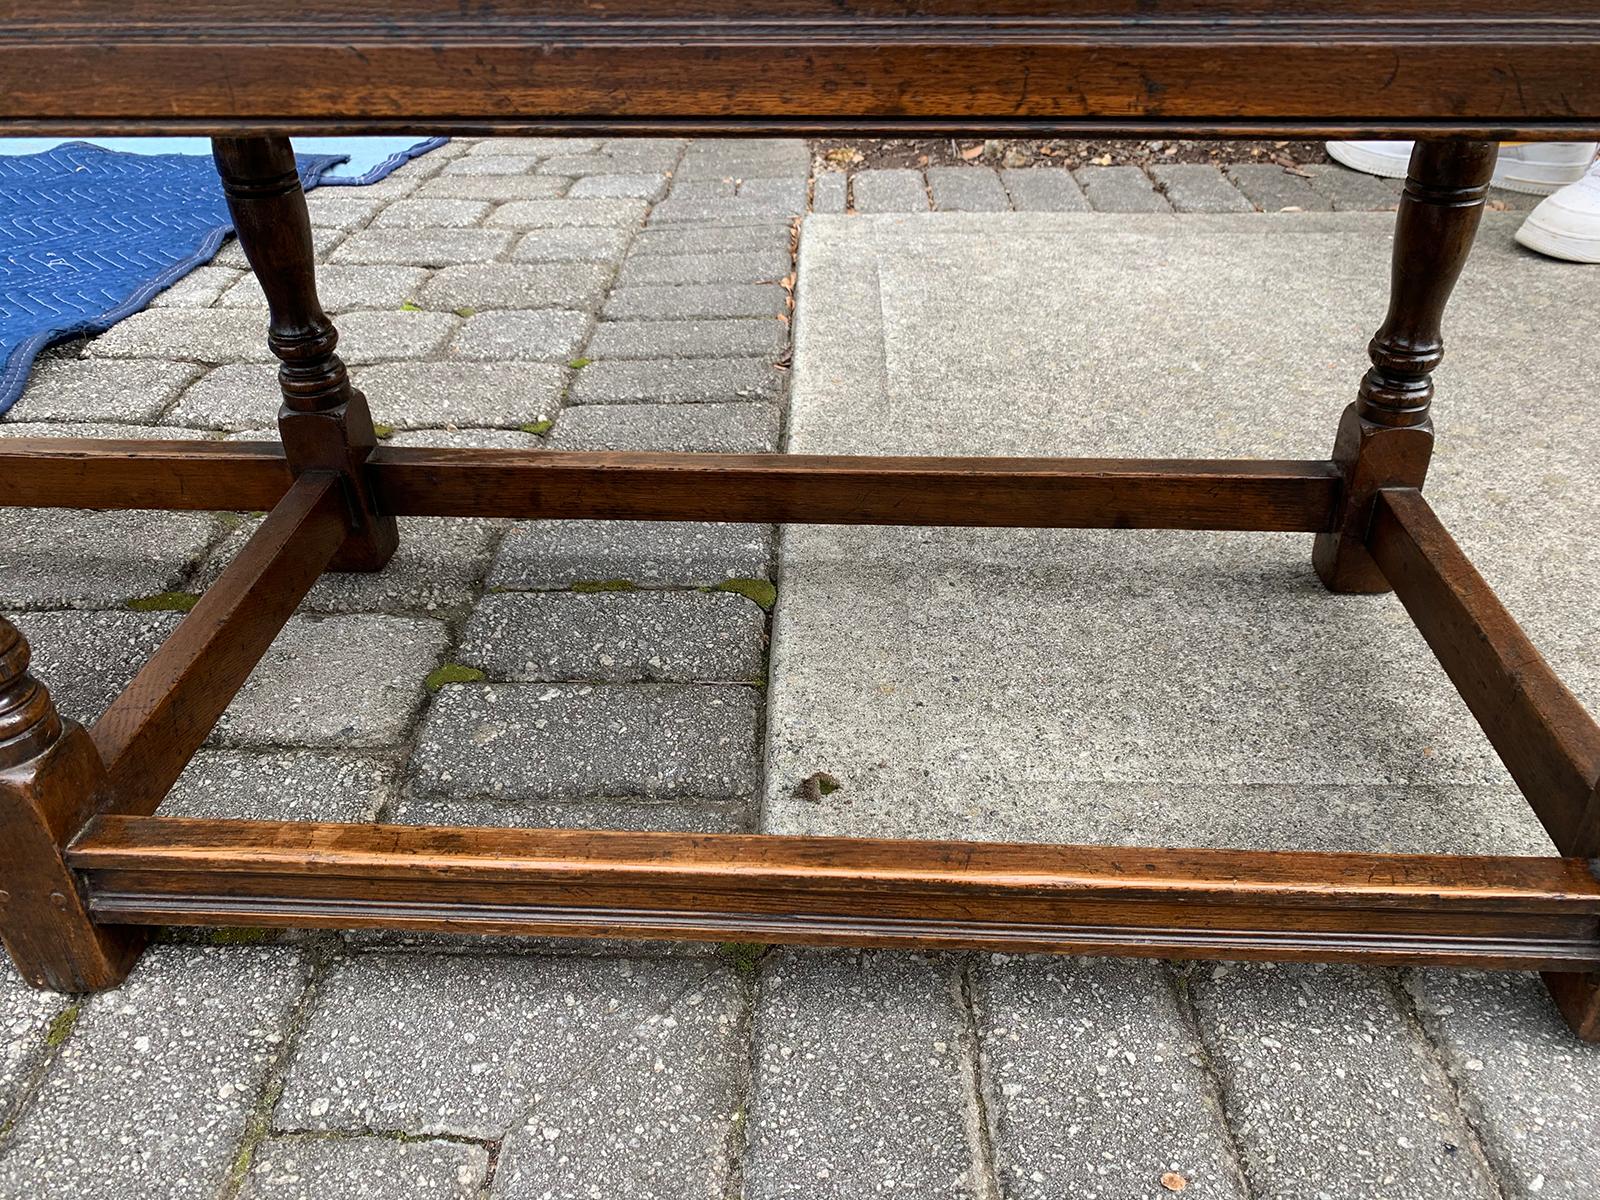 Long English Wood Coffee Table or Joint Stool Bench, circa 1900s-1930s 8